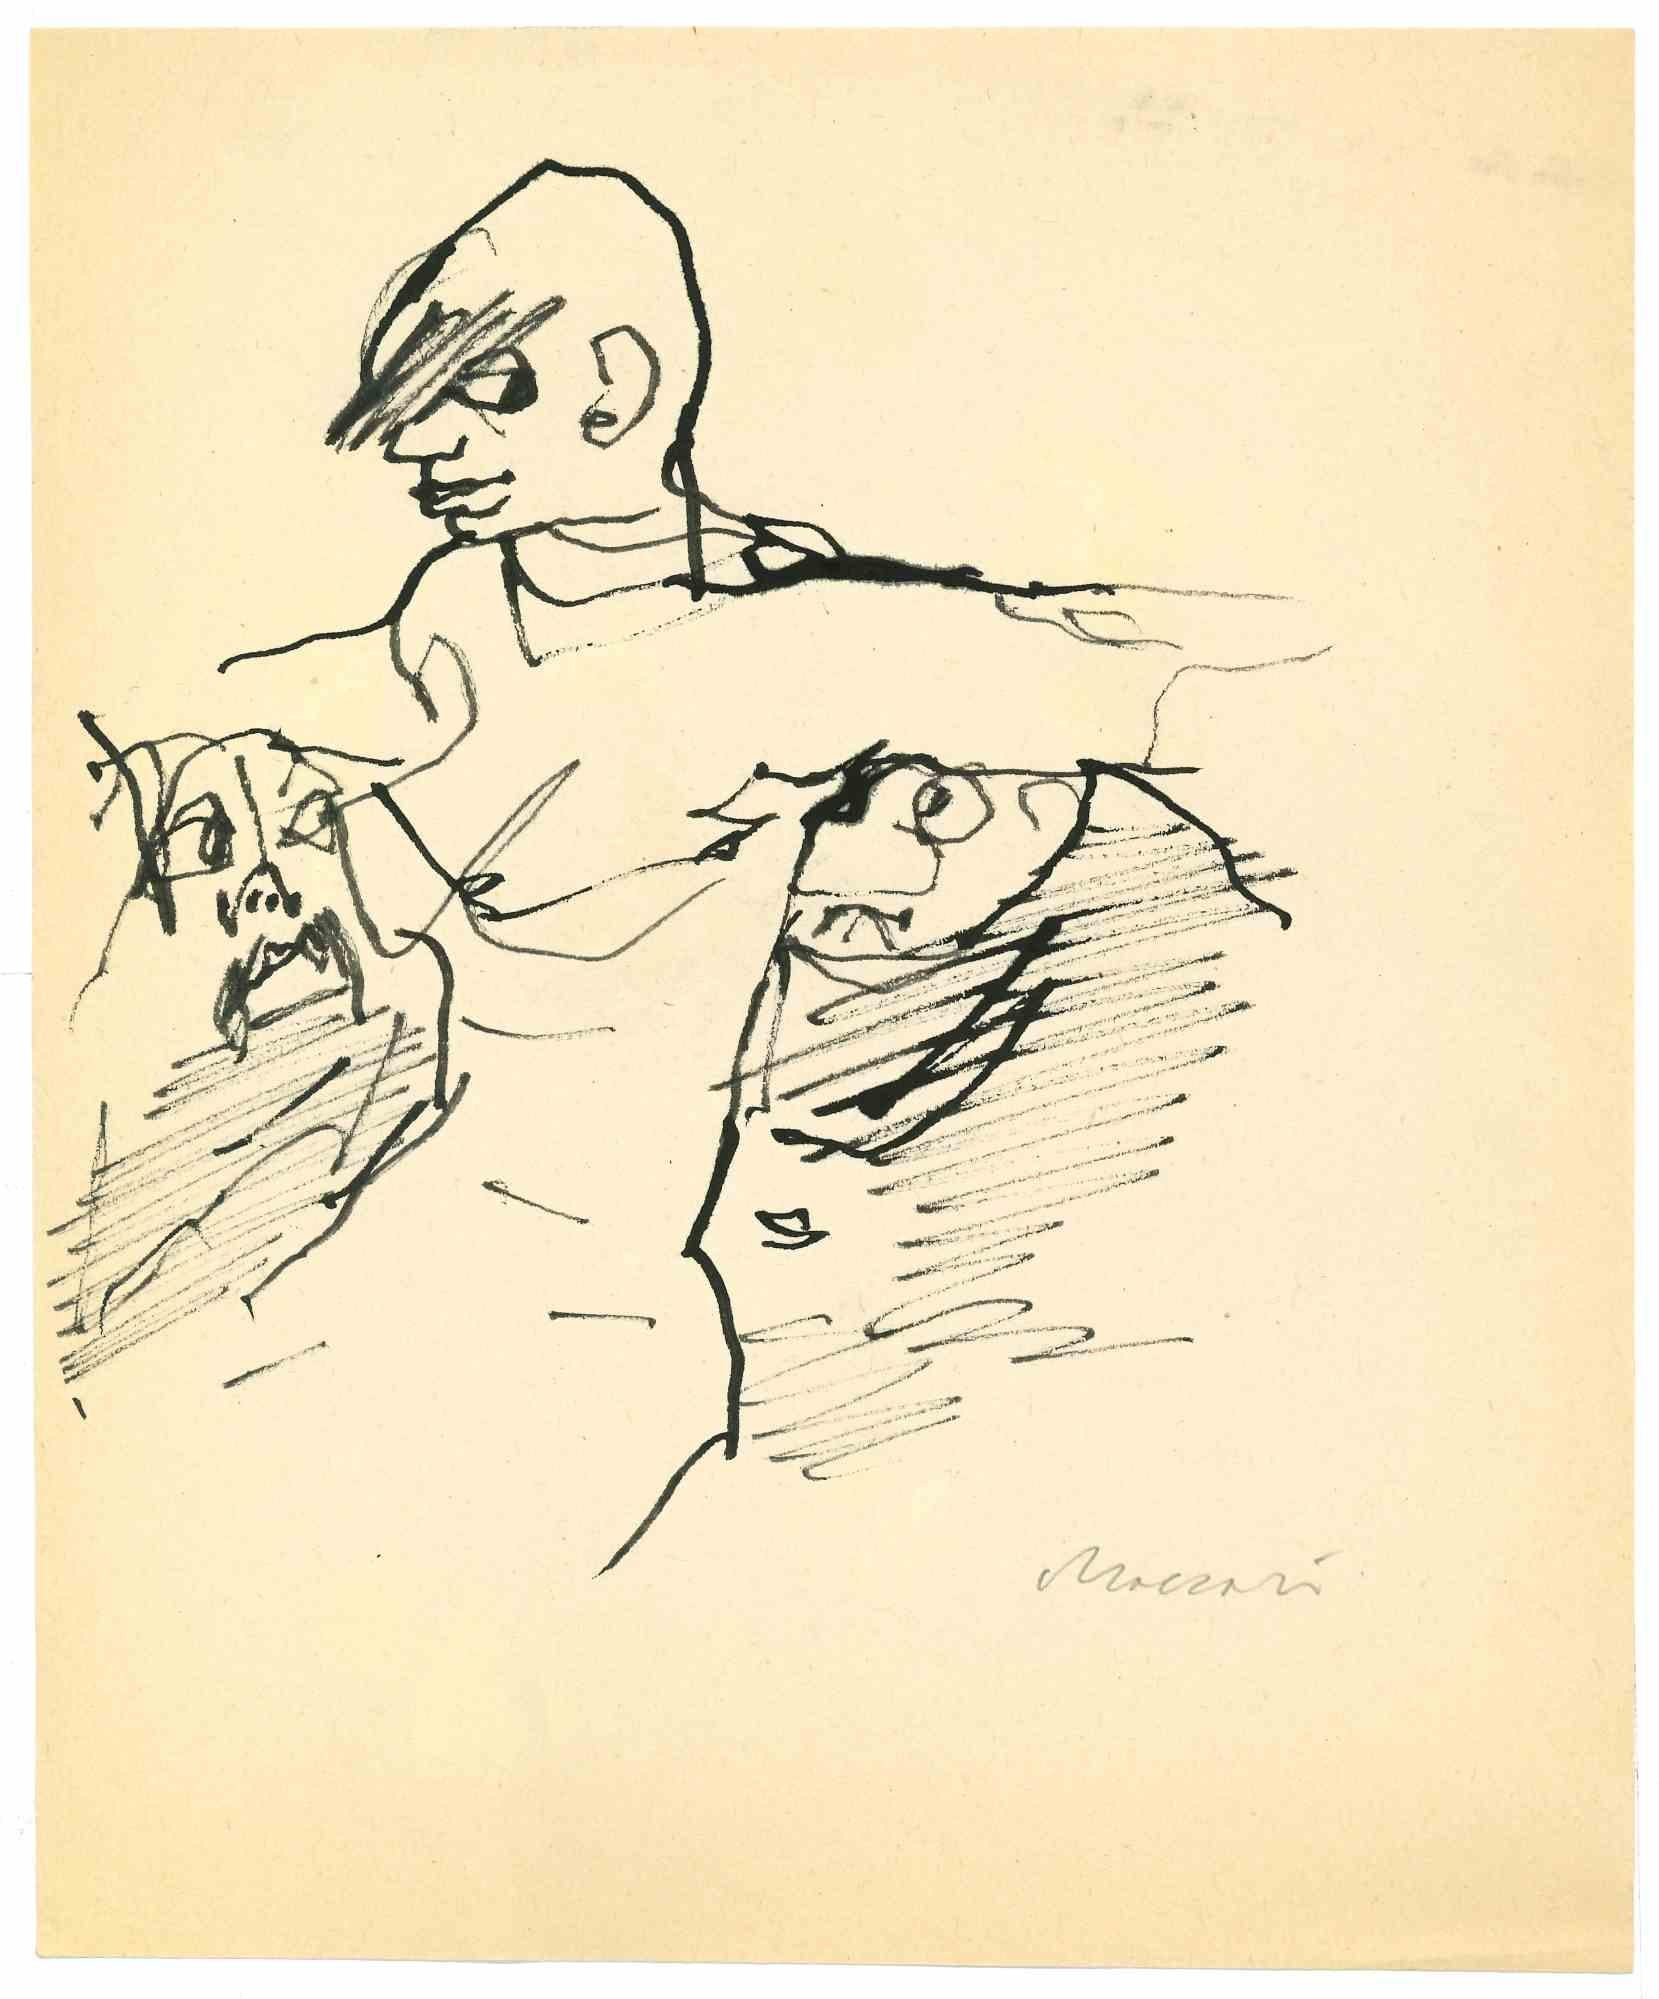 Seductive Nude is a China Ink Drawing realized by Mino Maccari  (1924-1989) in the 1960s.

Hand-signed on the lower.

Good condition.

Mino Maccari (Siena, 1924-Rome, June 16, 1989) was an Italian writer, painter, engraver and journalist, winner of